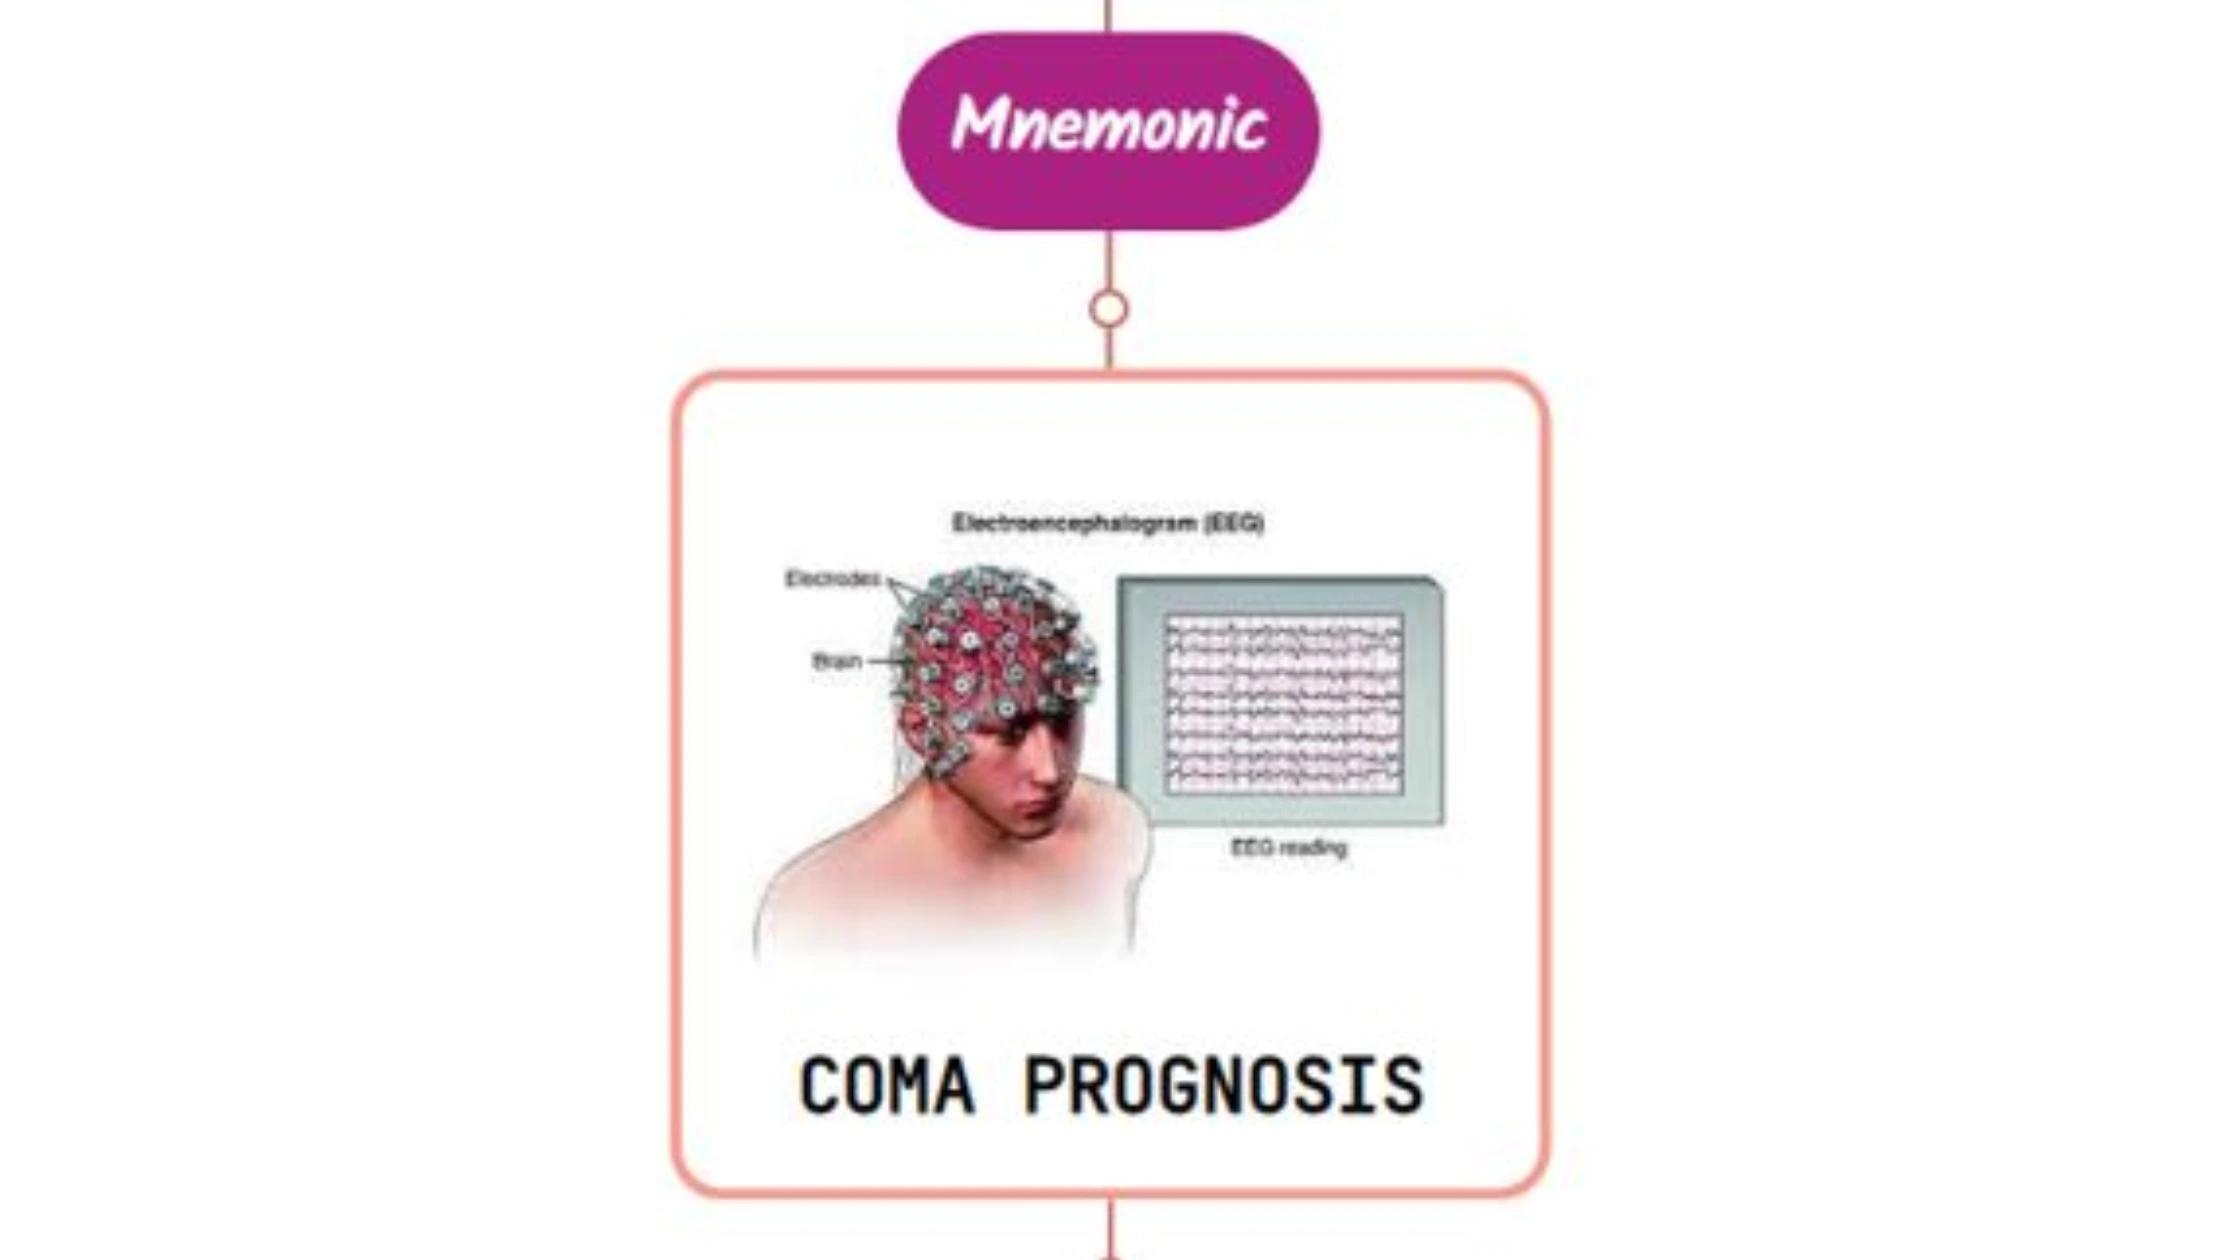 You are currently viewing Coma Prognosis Mnemonic